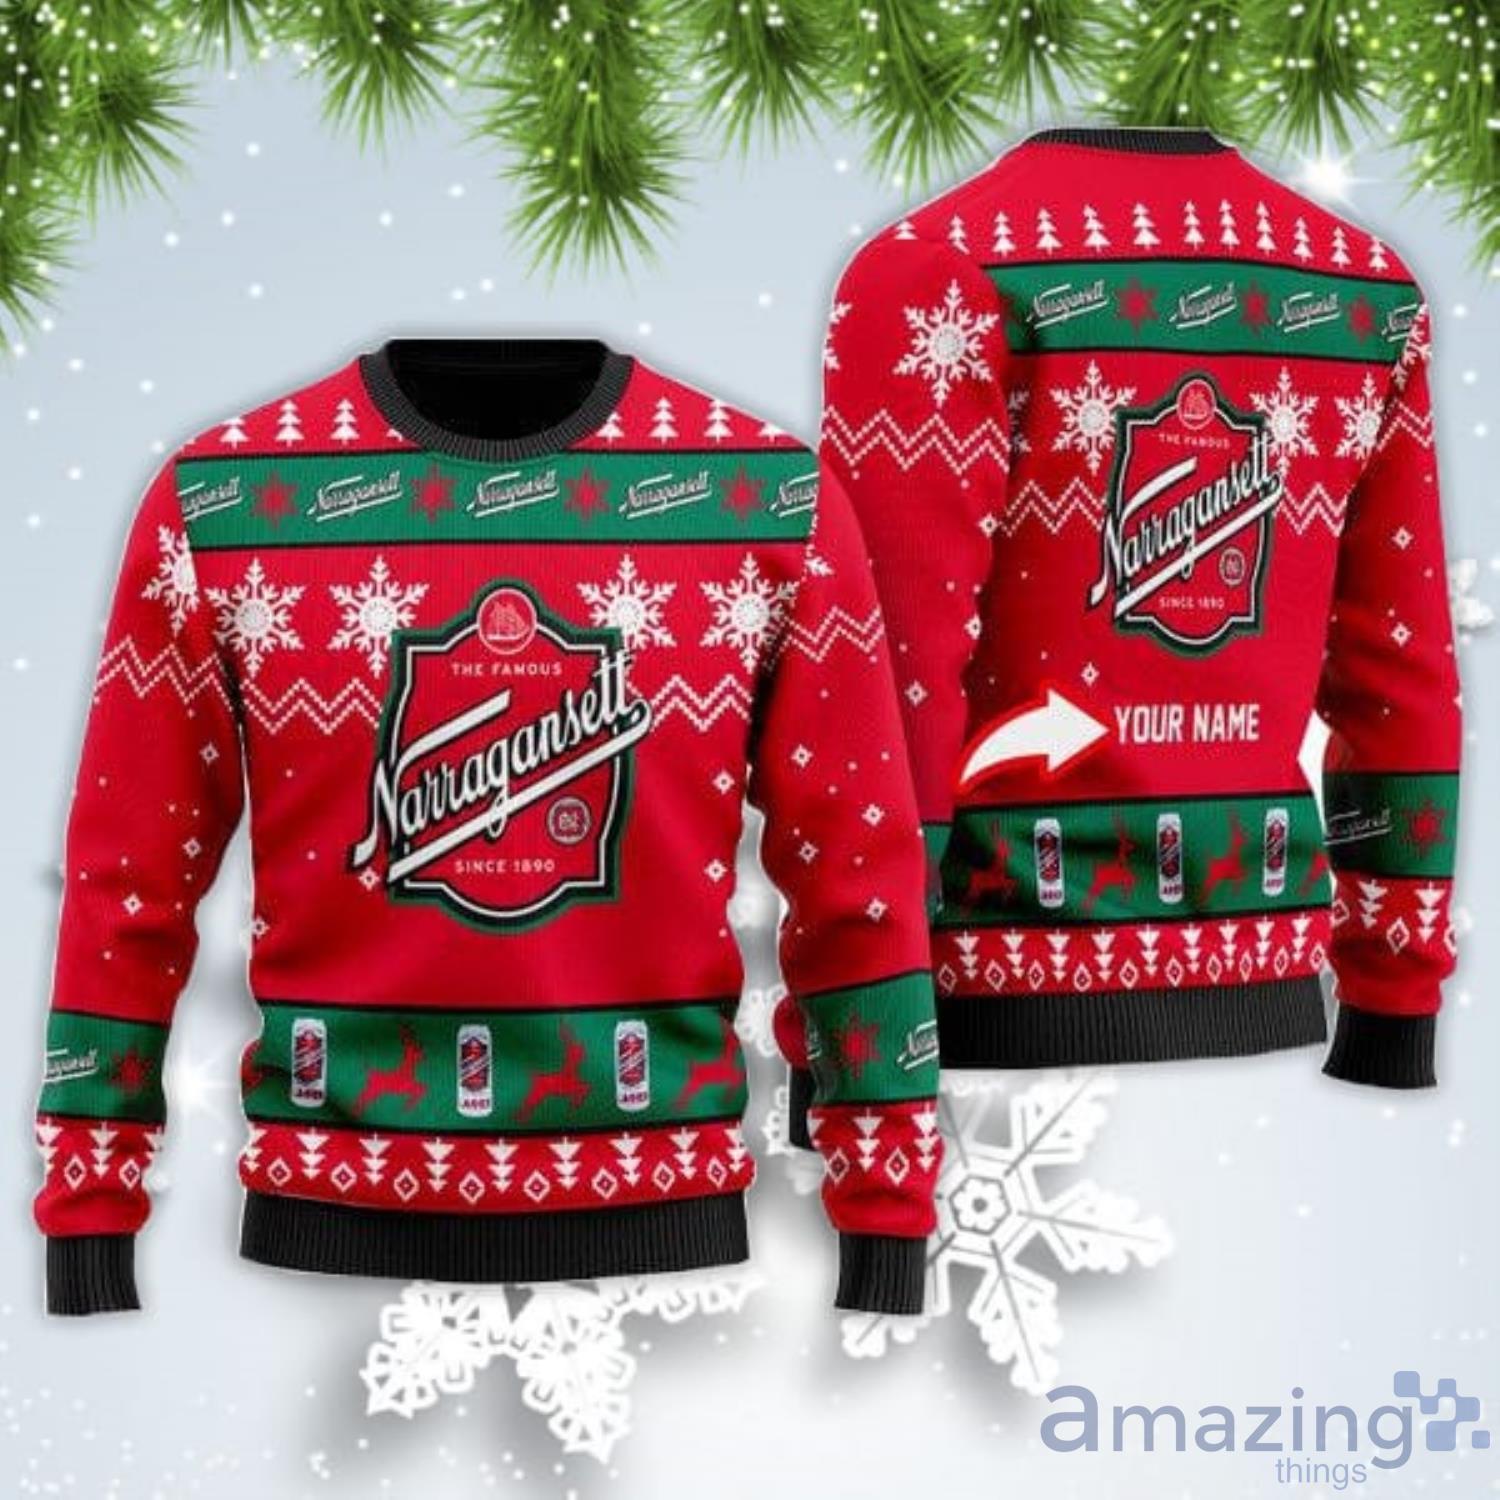 Personalized Name Funny Narragansett Beer Christmas Gift Ugly Christmas Sweater Product Photo 1